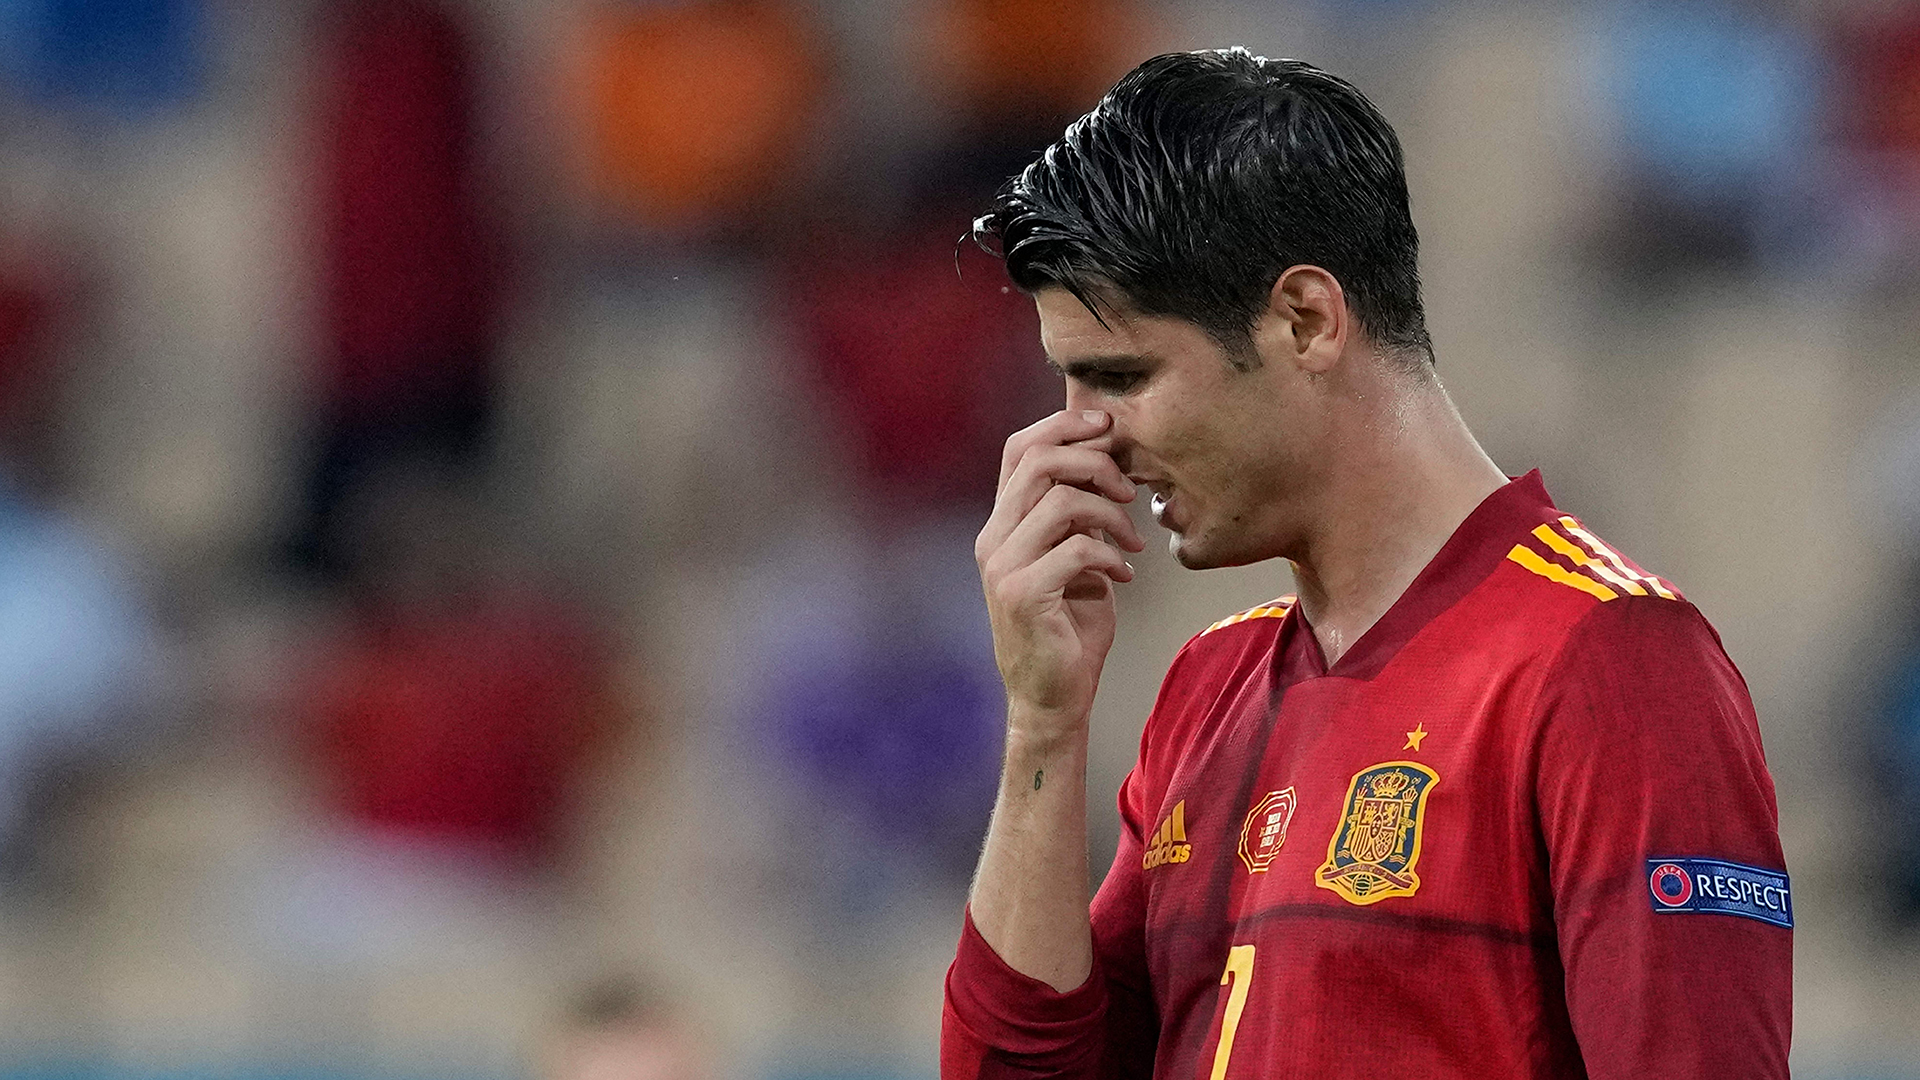 'I can't be liked by everyone' - Morata addresses Euro 2020 criticism